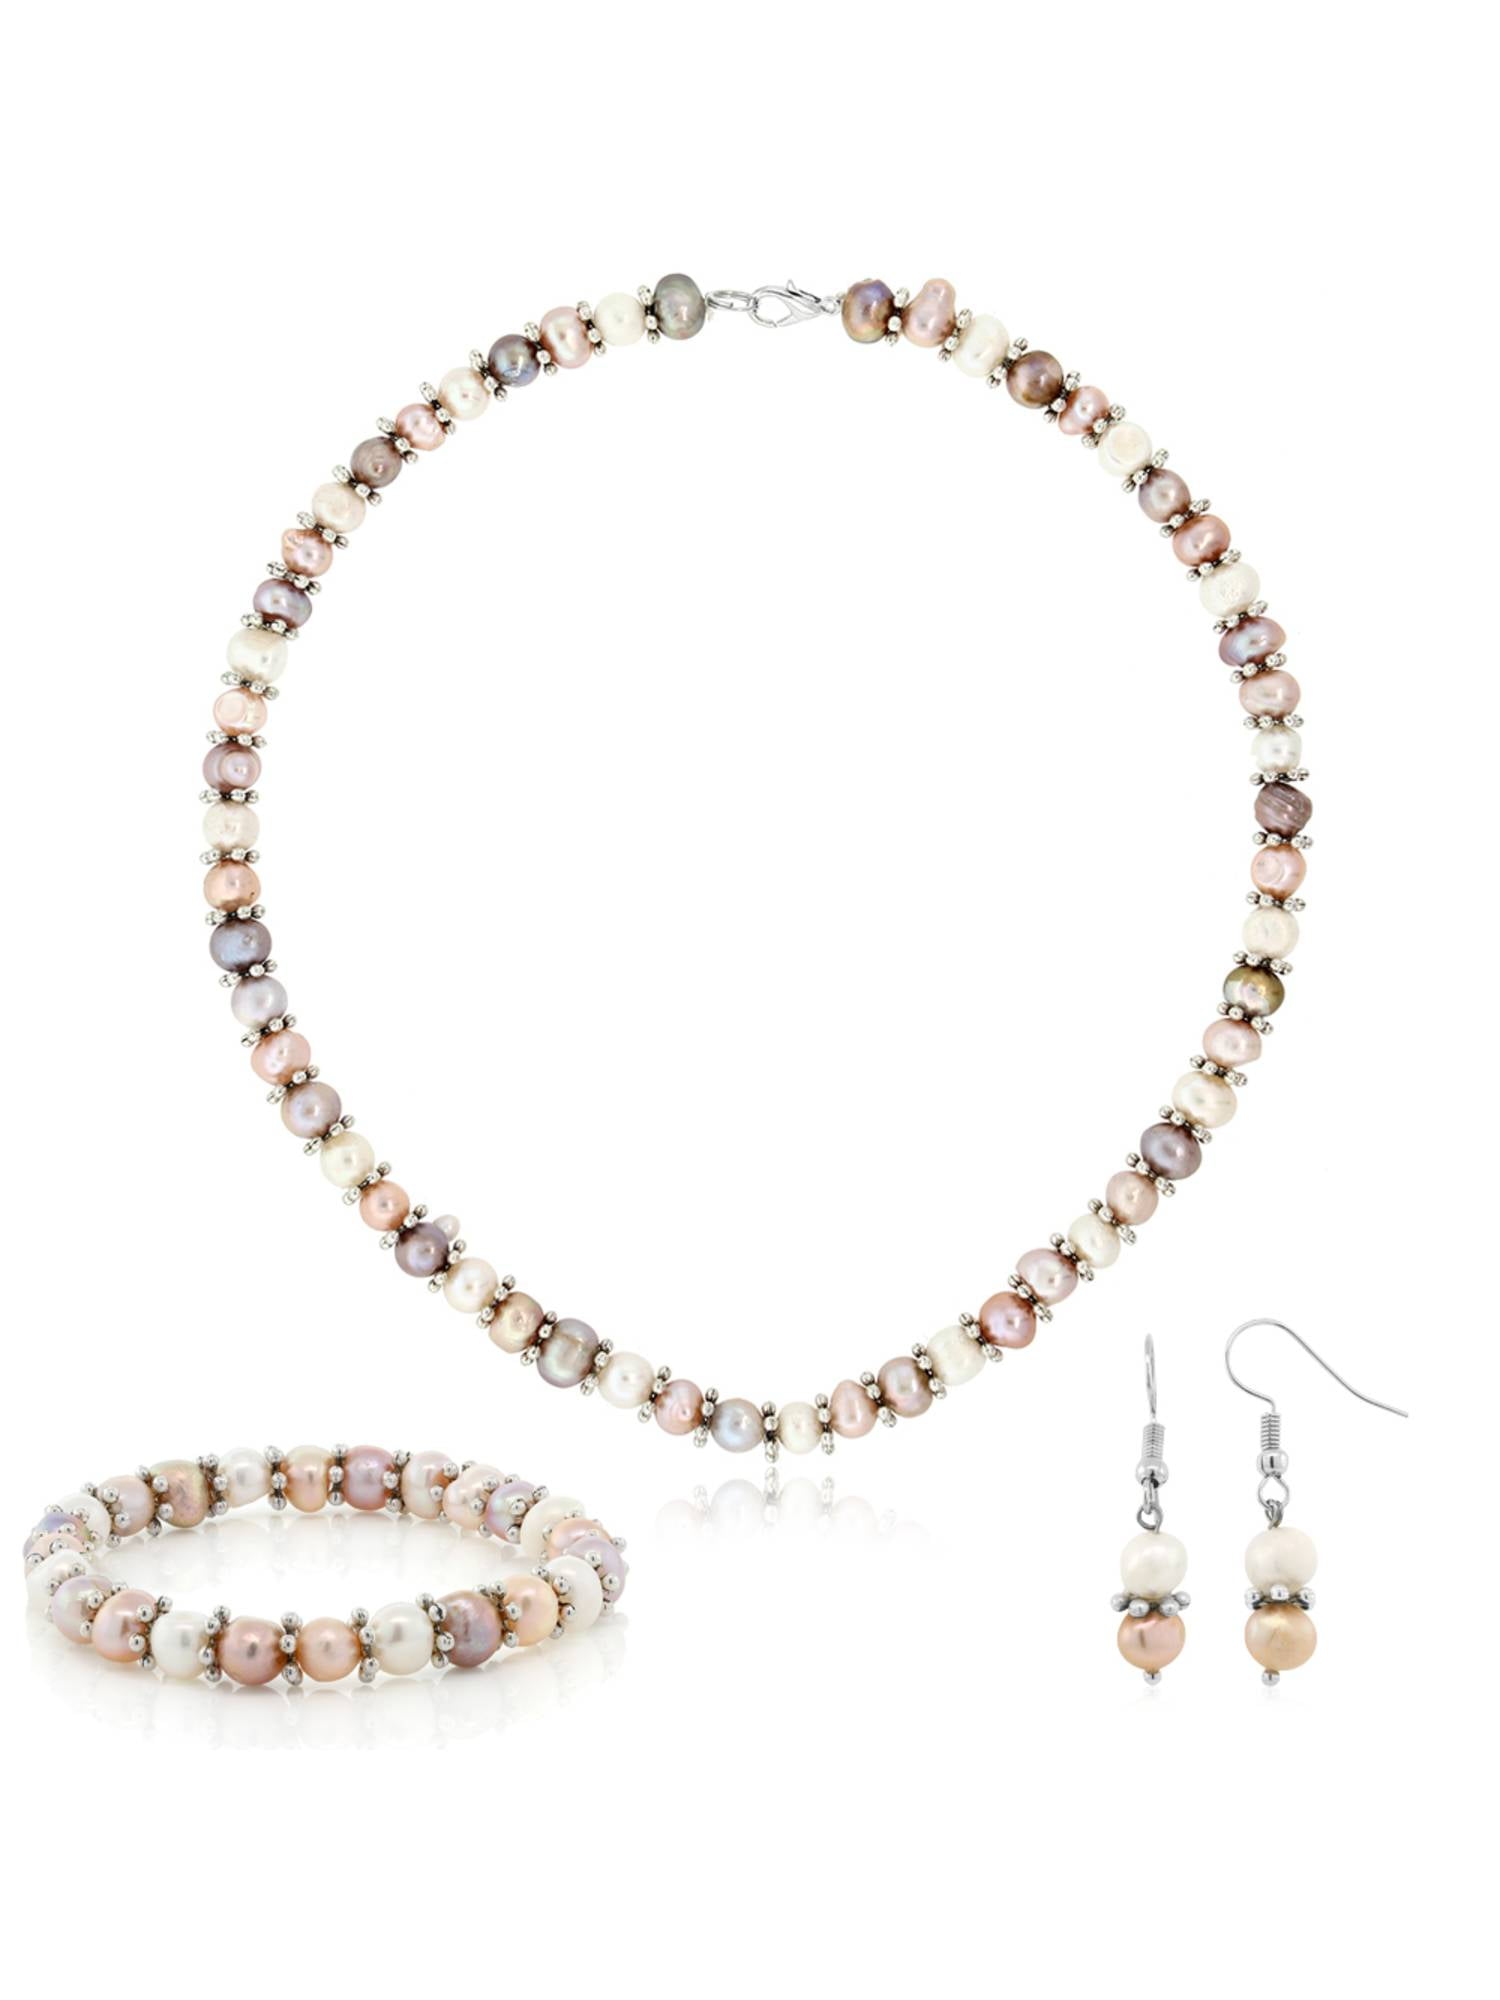 Gem Stone King Multi-Color Cultured Freshwater Pearl Necklace Earrings Bracelet Set 7-8MM 18inches